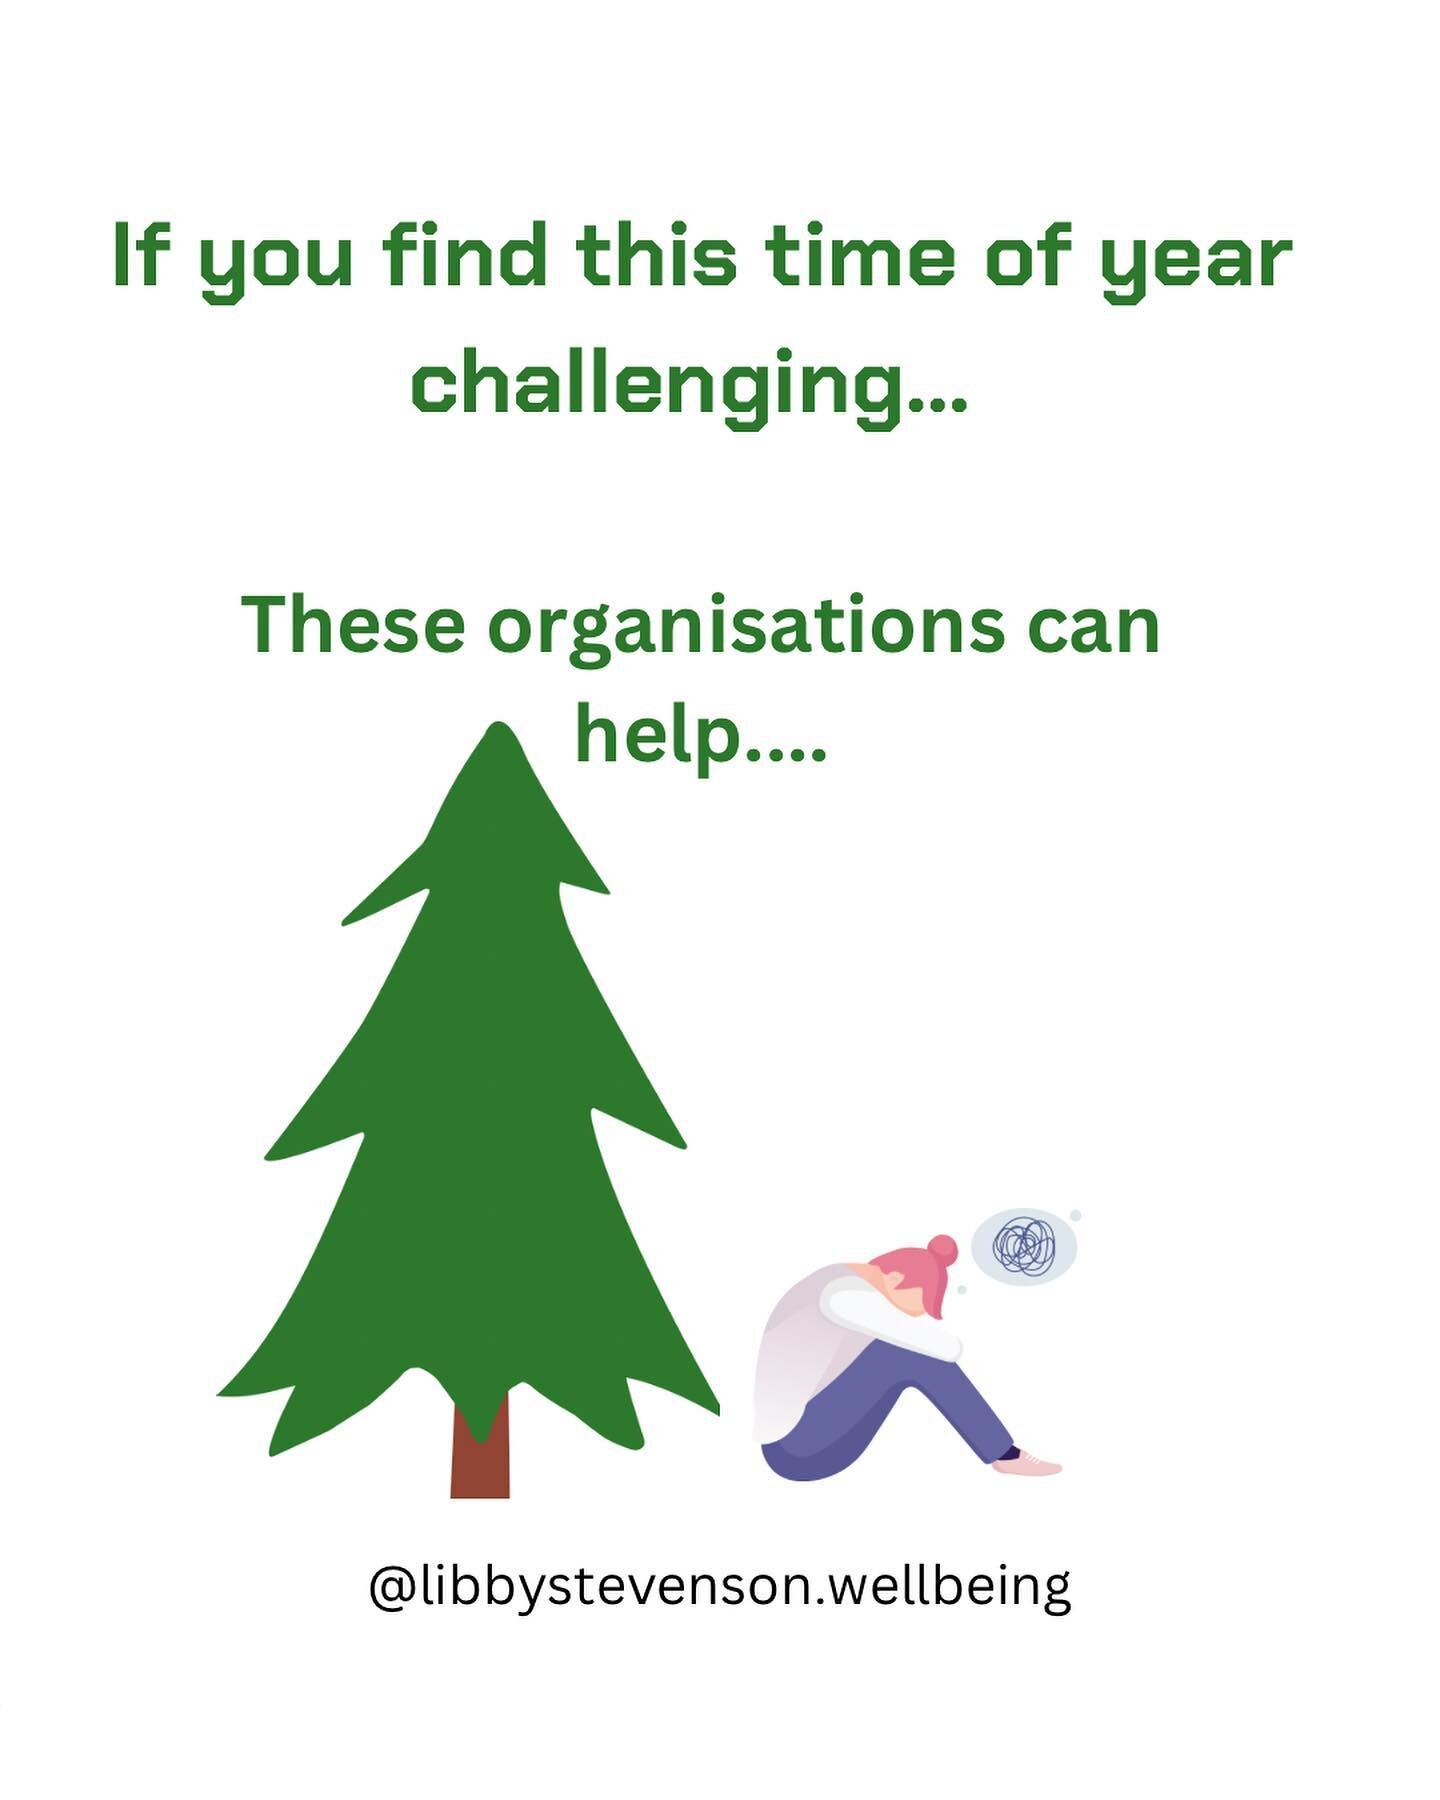 Share this far and wide.

Not feeling the Christmas spirit is a difficult discussion to have with family and friends and that&rsquo;s why these organisations exist. They are staffed by professionals who can advise, guide and support you without judge